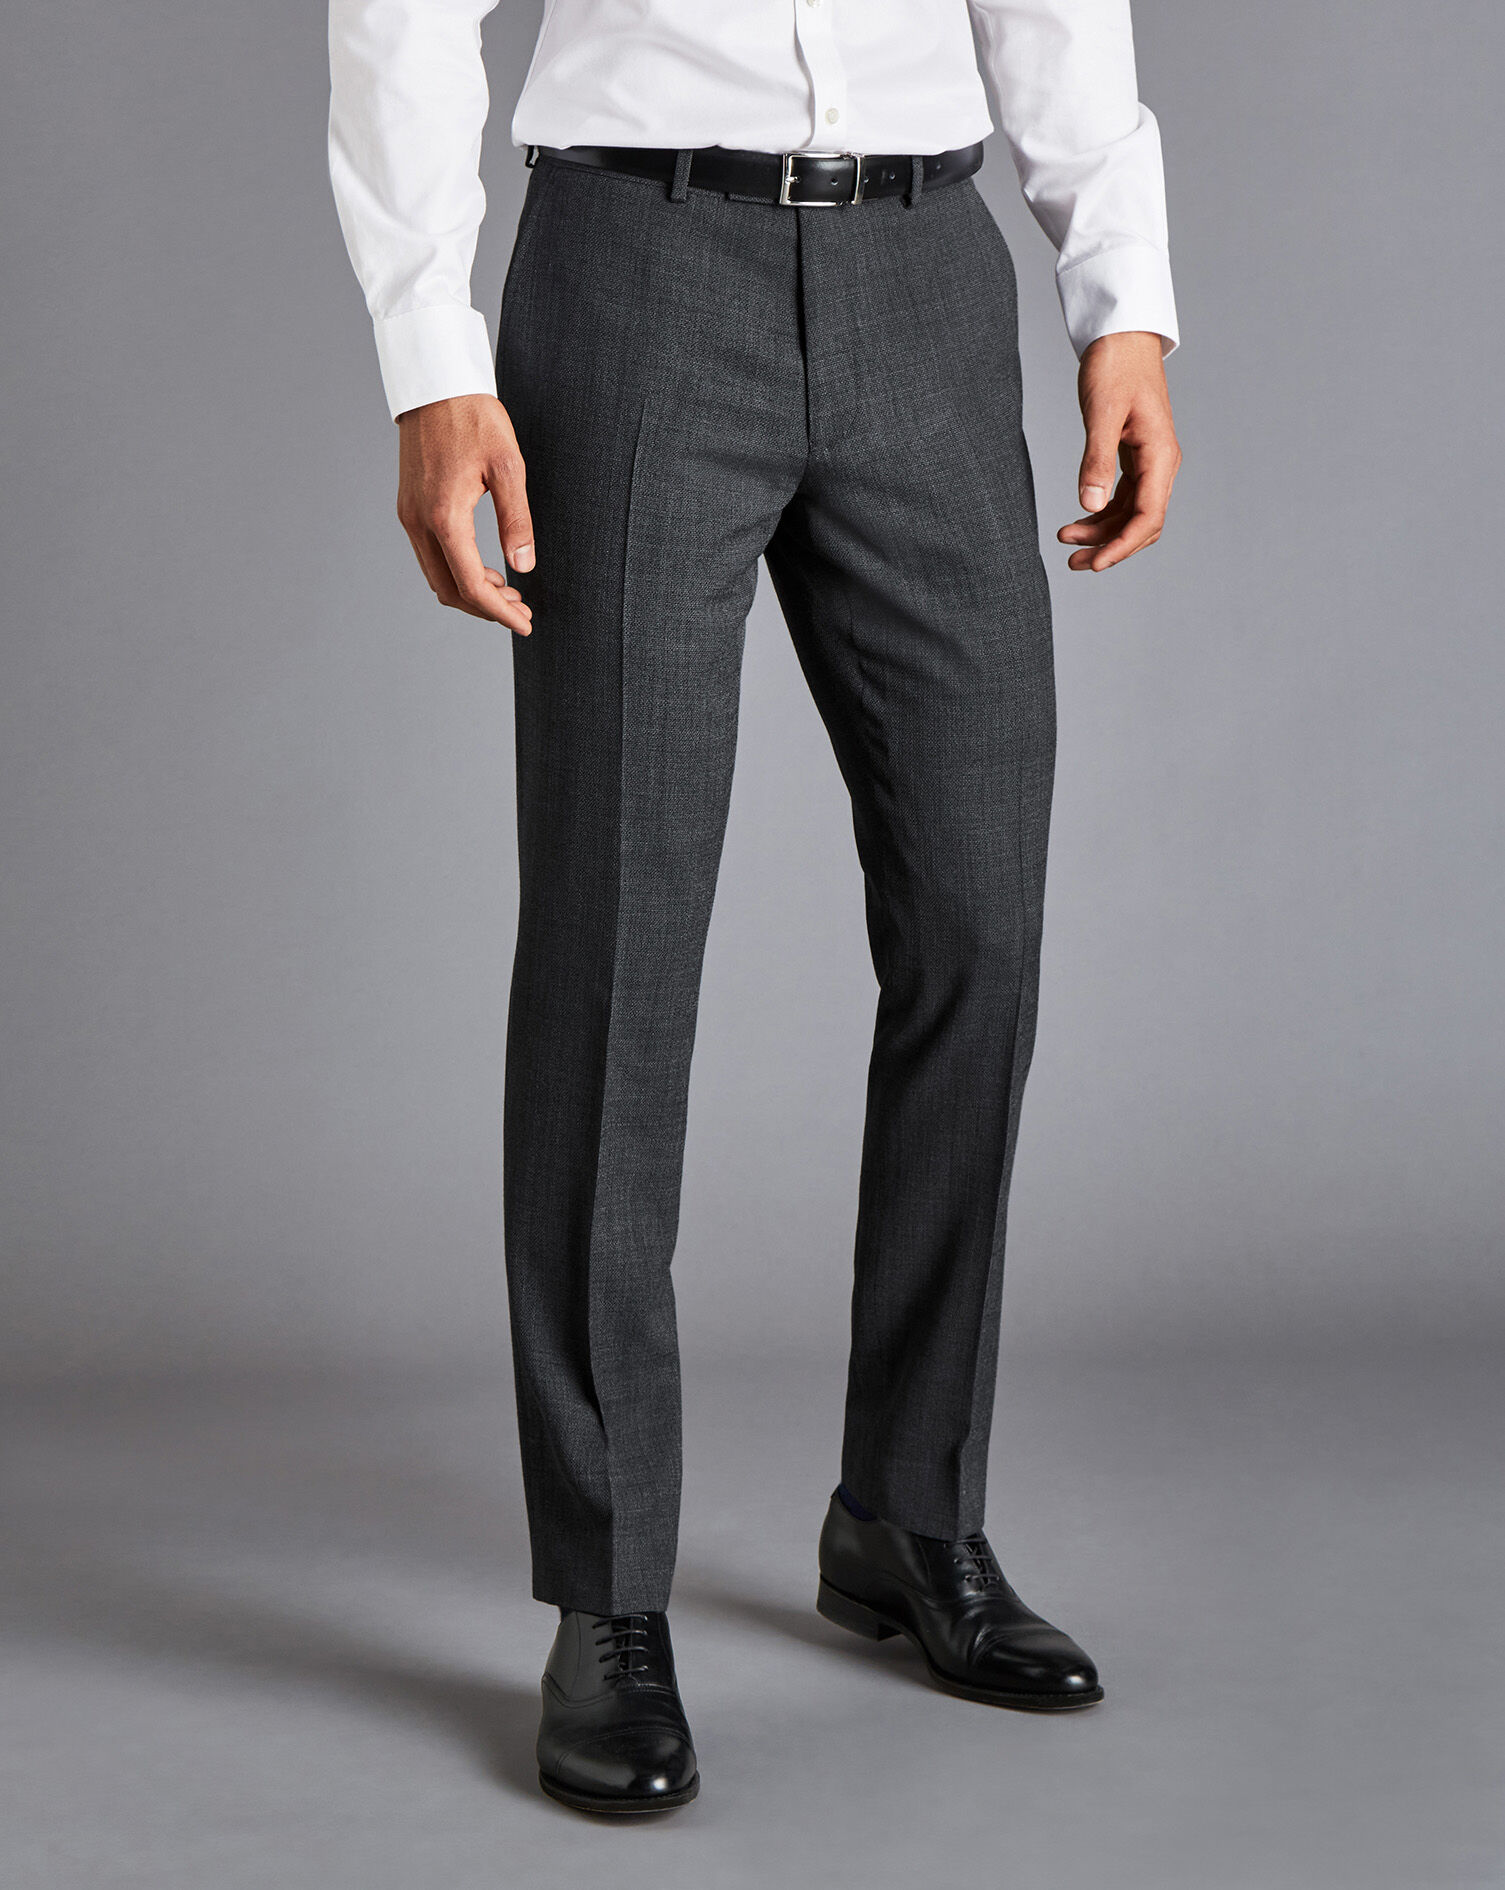 Buy Black Coffee Charcoal Grey Sharp Fit Formal Trousers - Trousers for Men  1847798 | Myntra